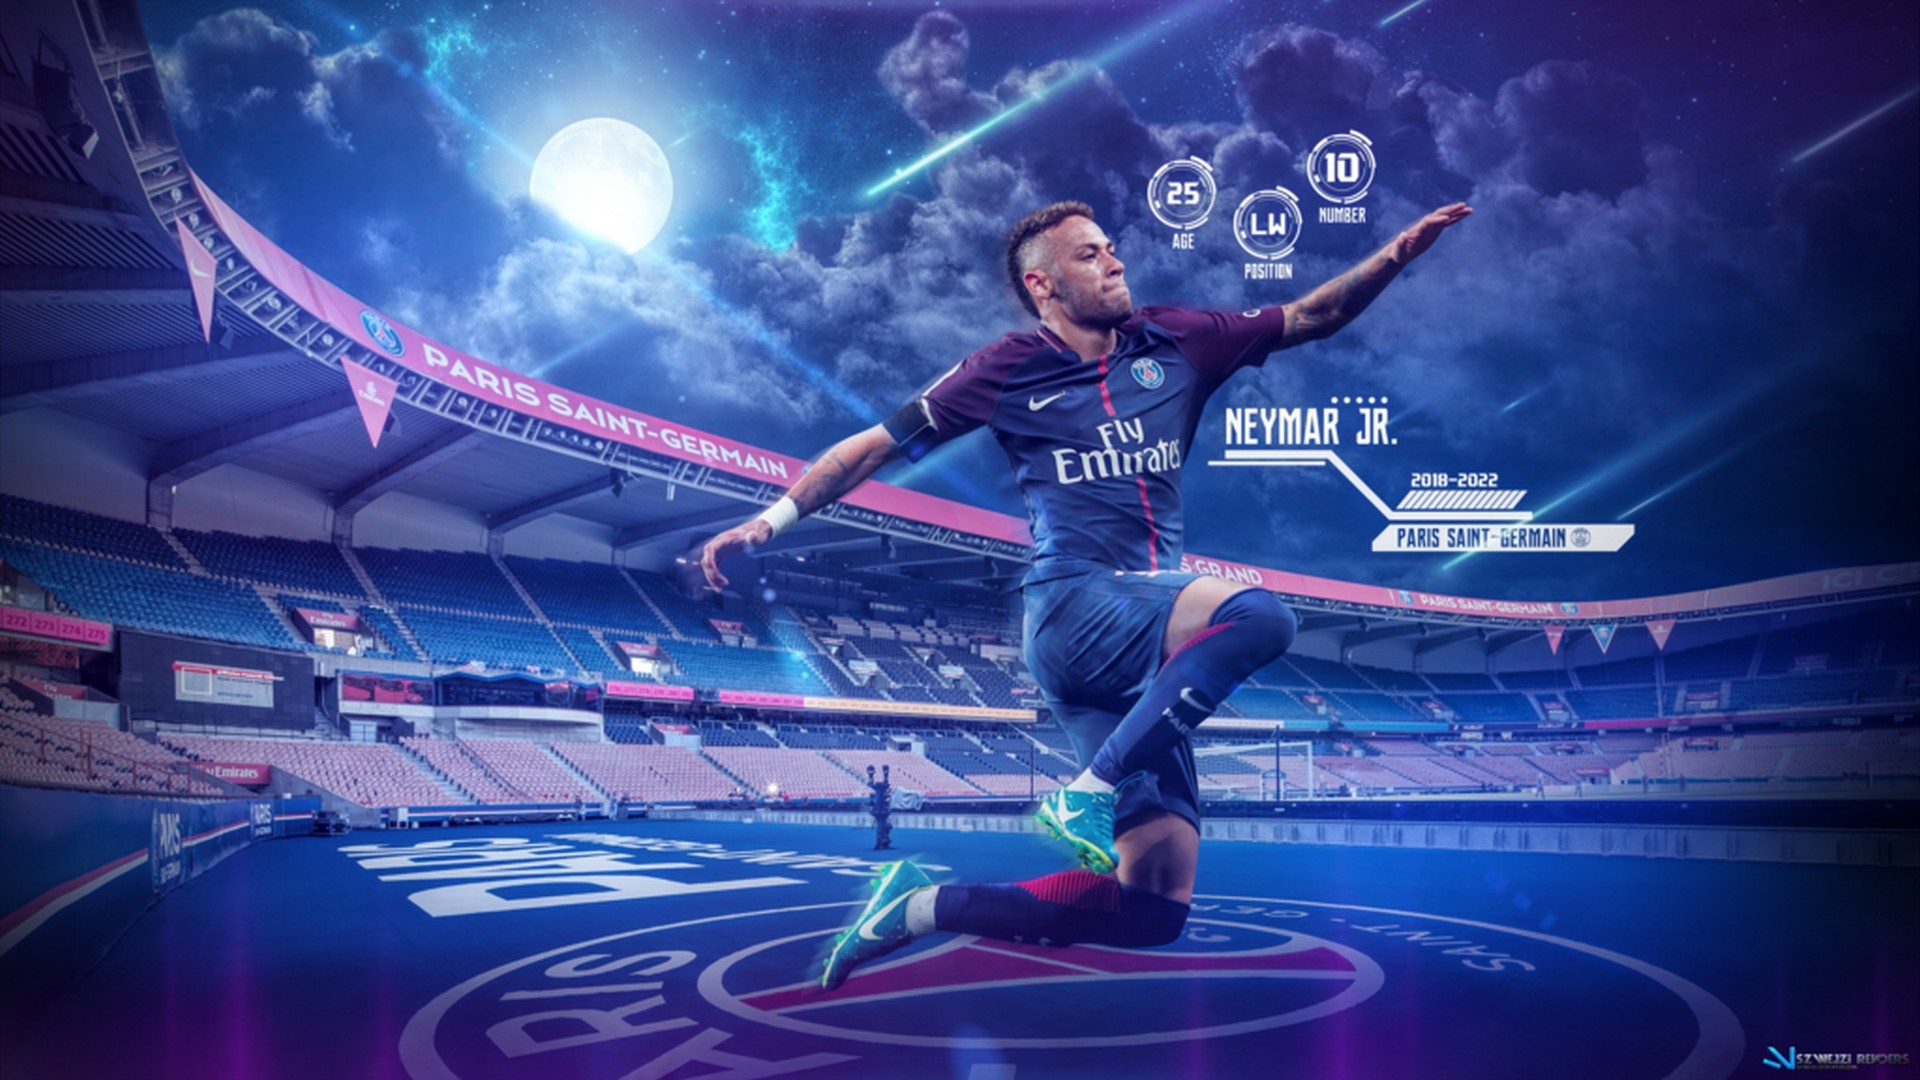 Wallpaper Neymar Desktop with image resolution 1920x1080 pixel. You can use this wallpaper as background for your desktop Computer Screensavers, Android or iPhone smartphones